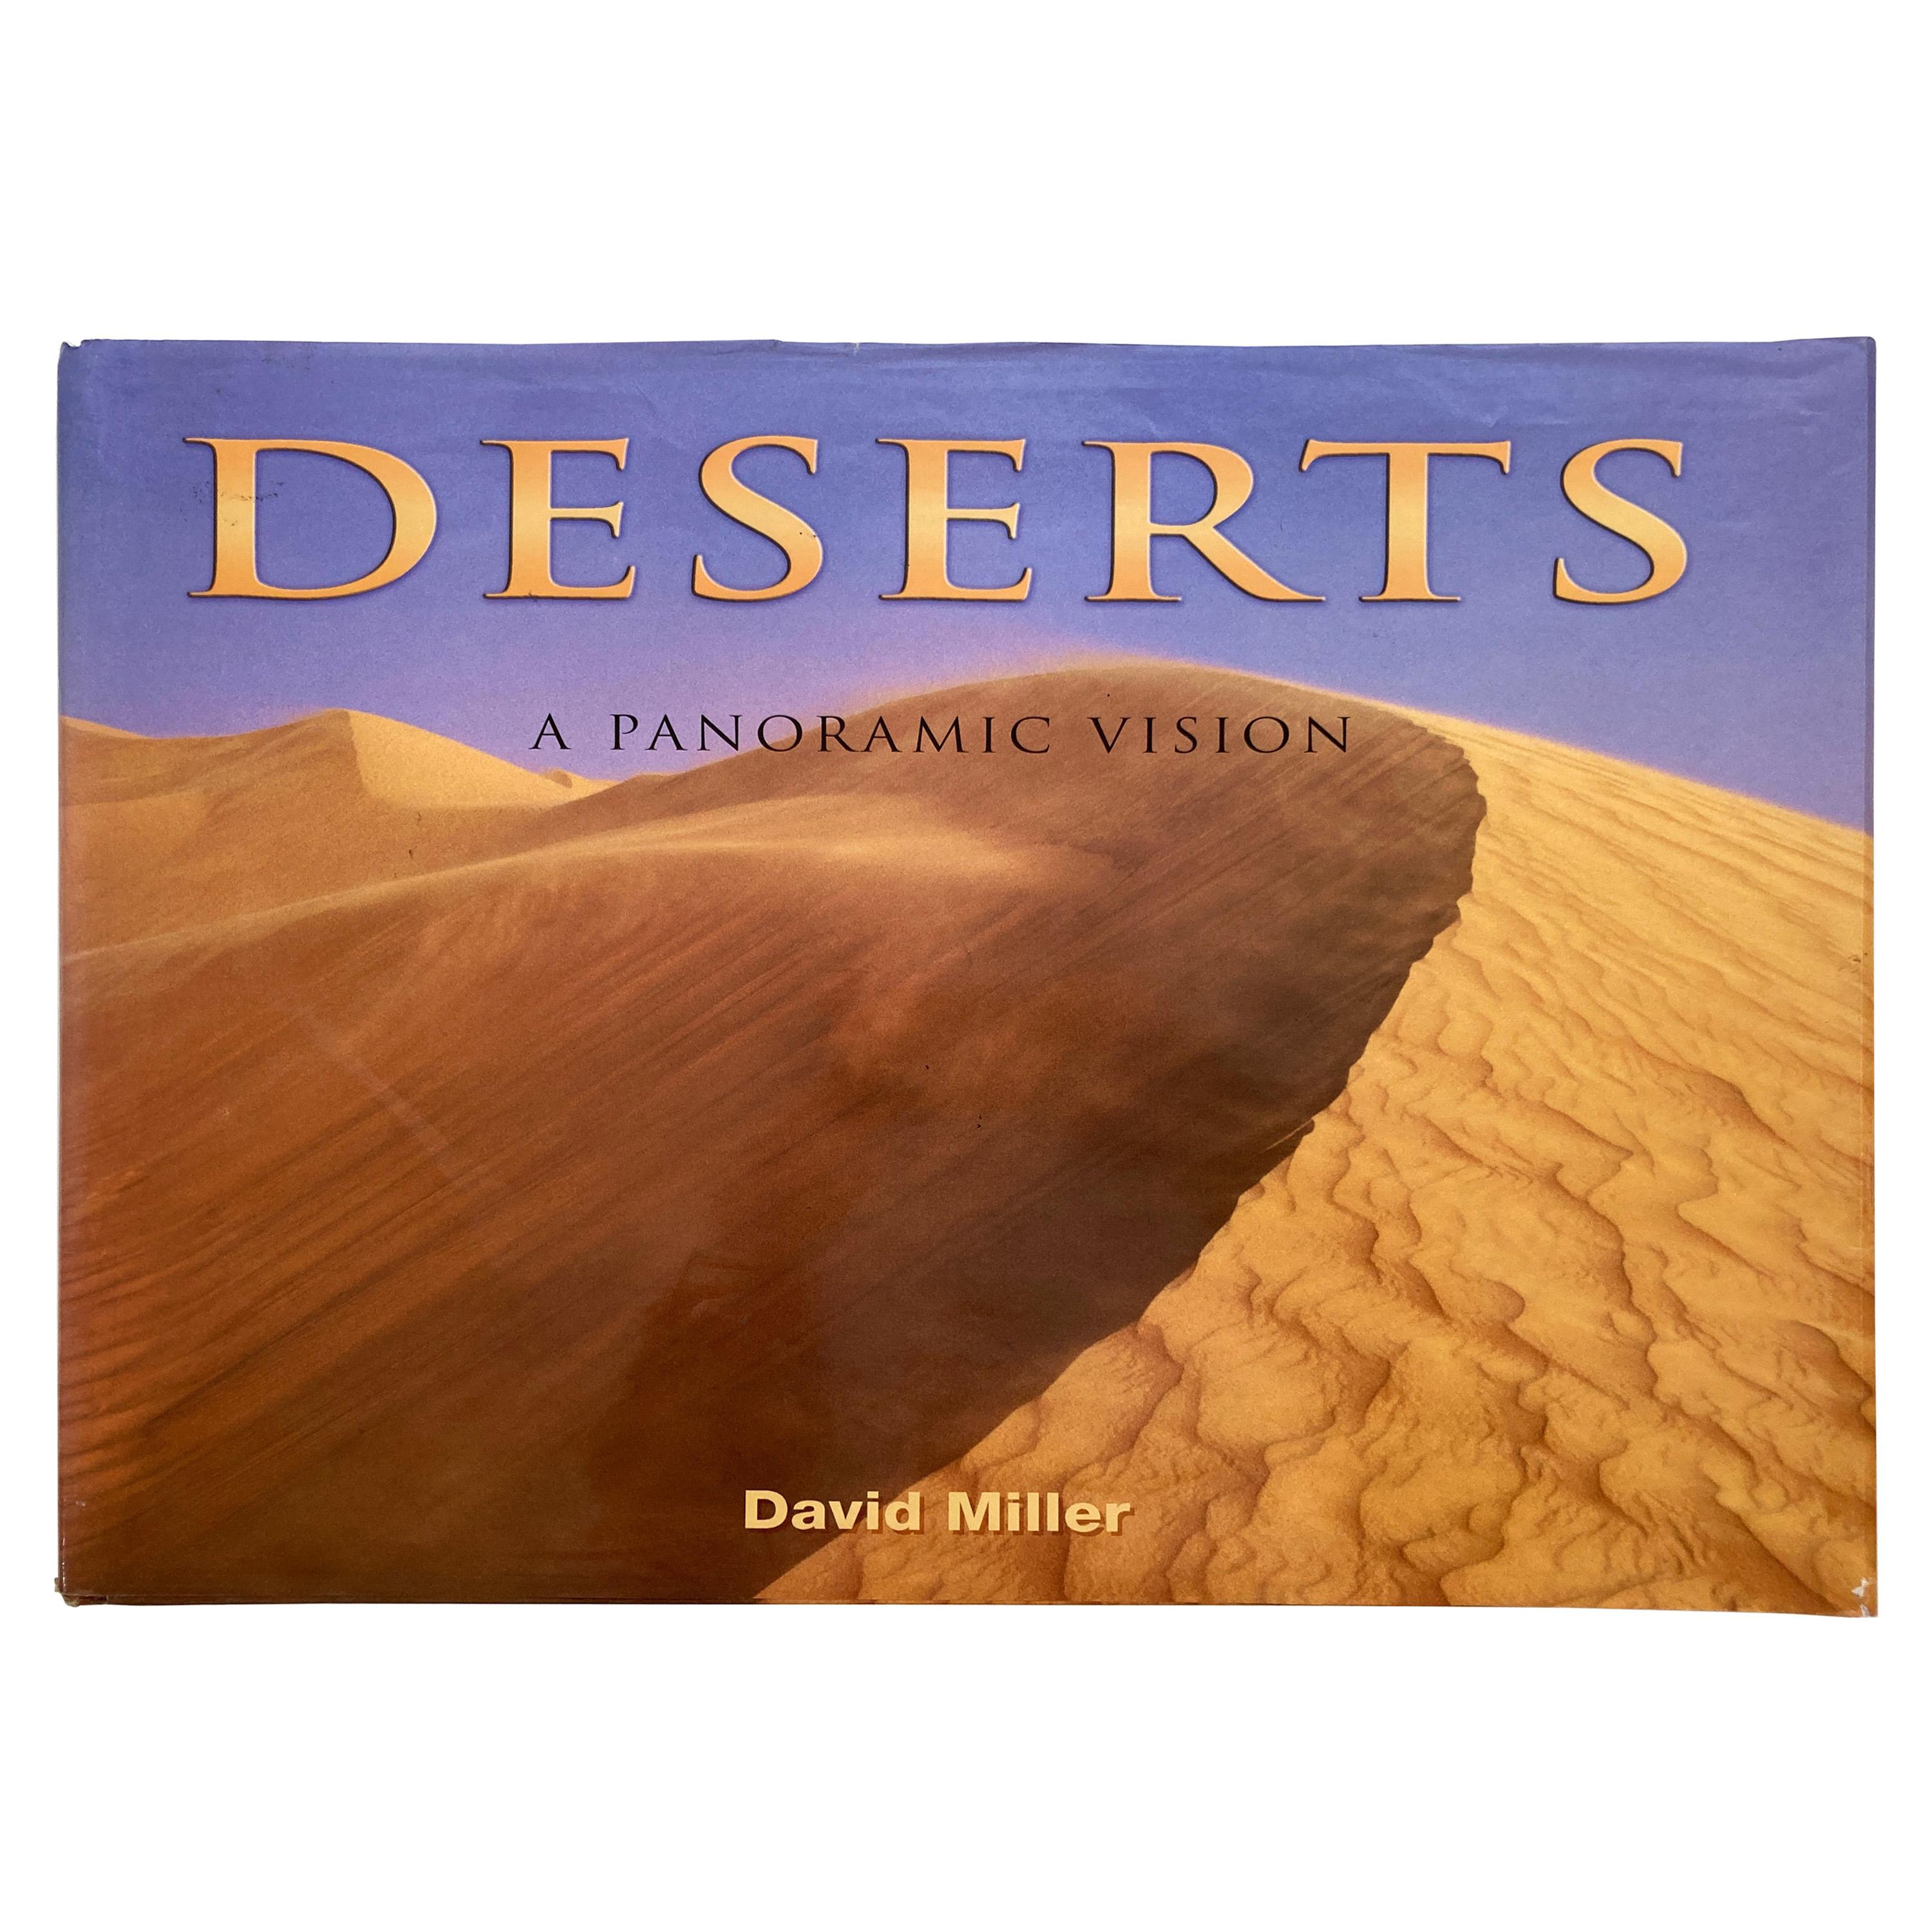 Deserts A Panoramic Vision by David Miller Large Hardcover Book For Sale